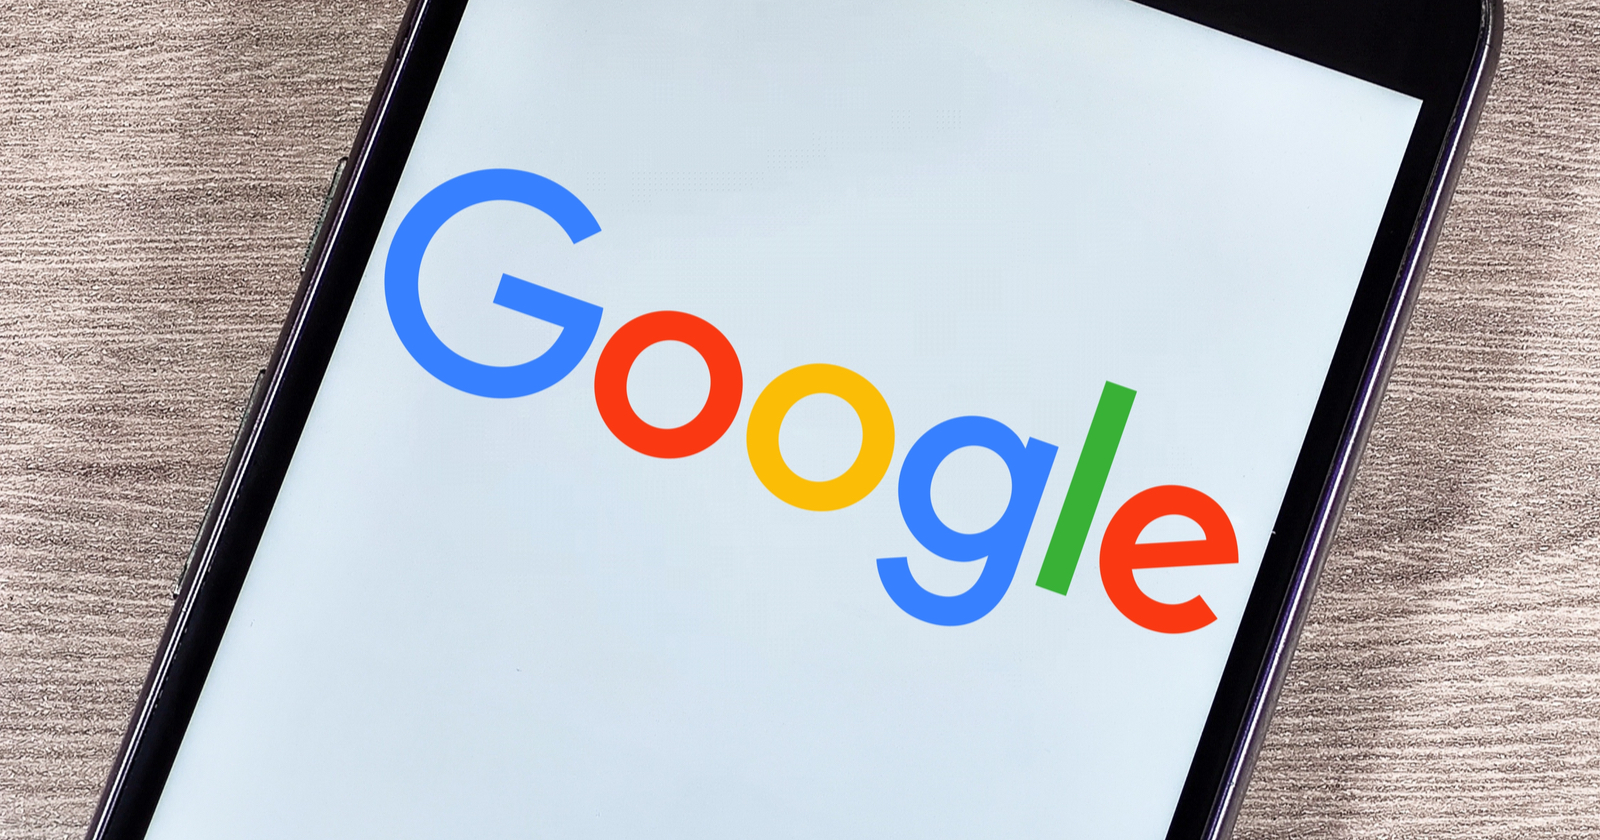 Google announces that Page Experience algorithm update and Core Web Vitals as a ranking factor are delayed.